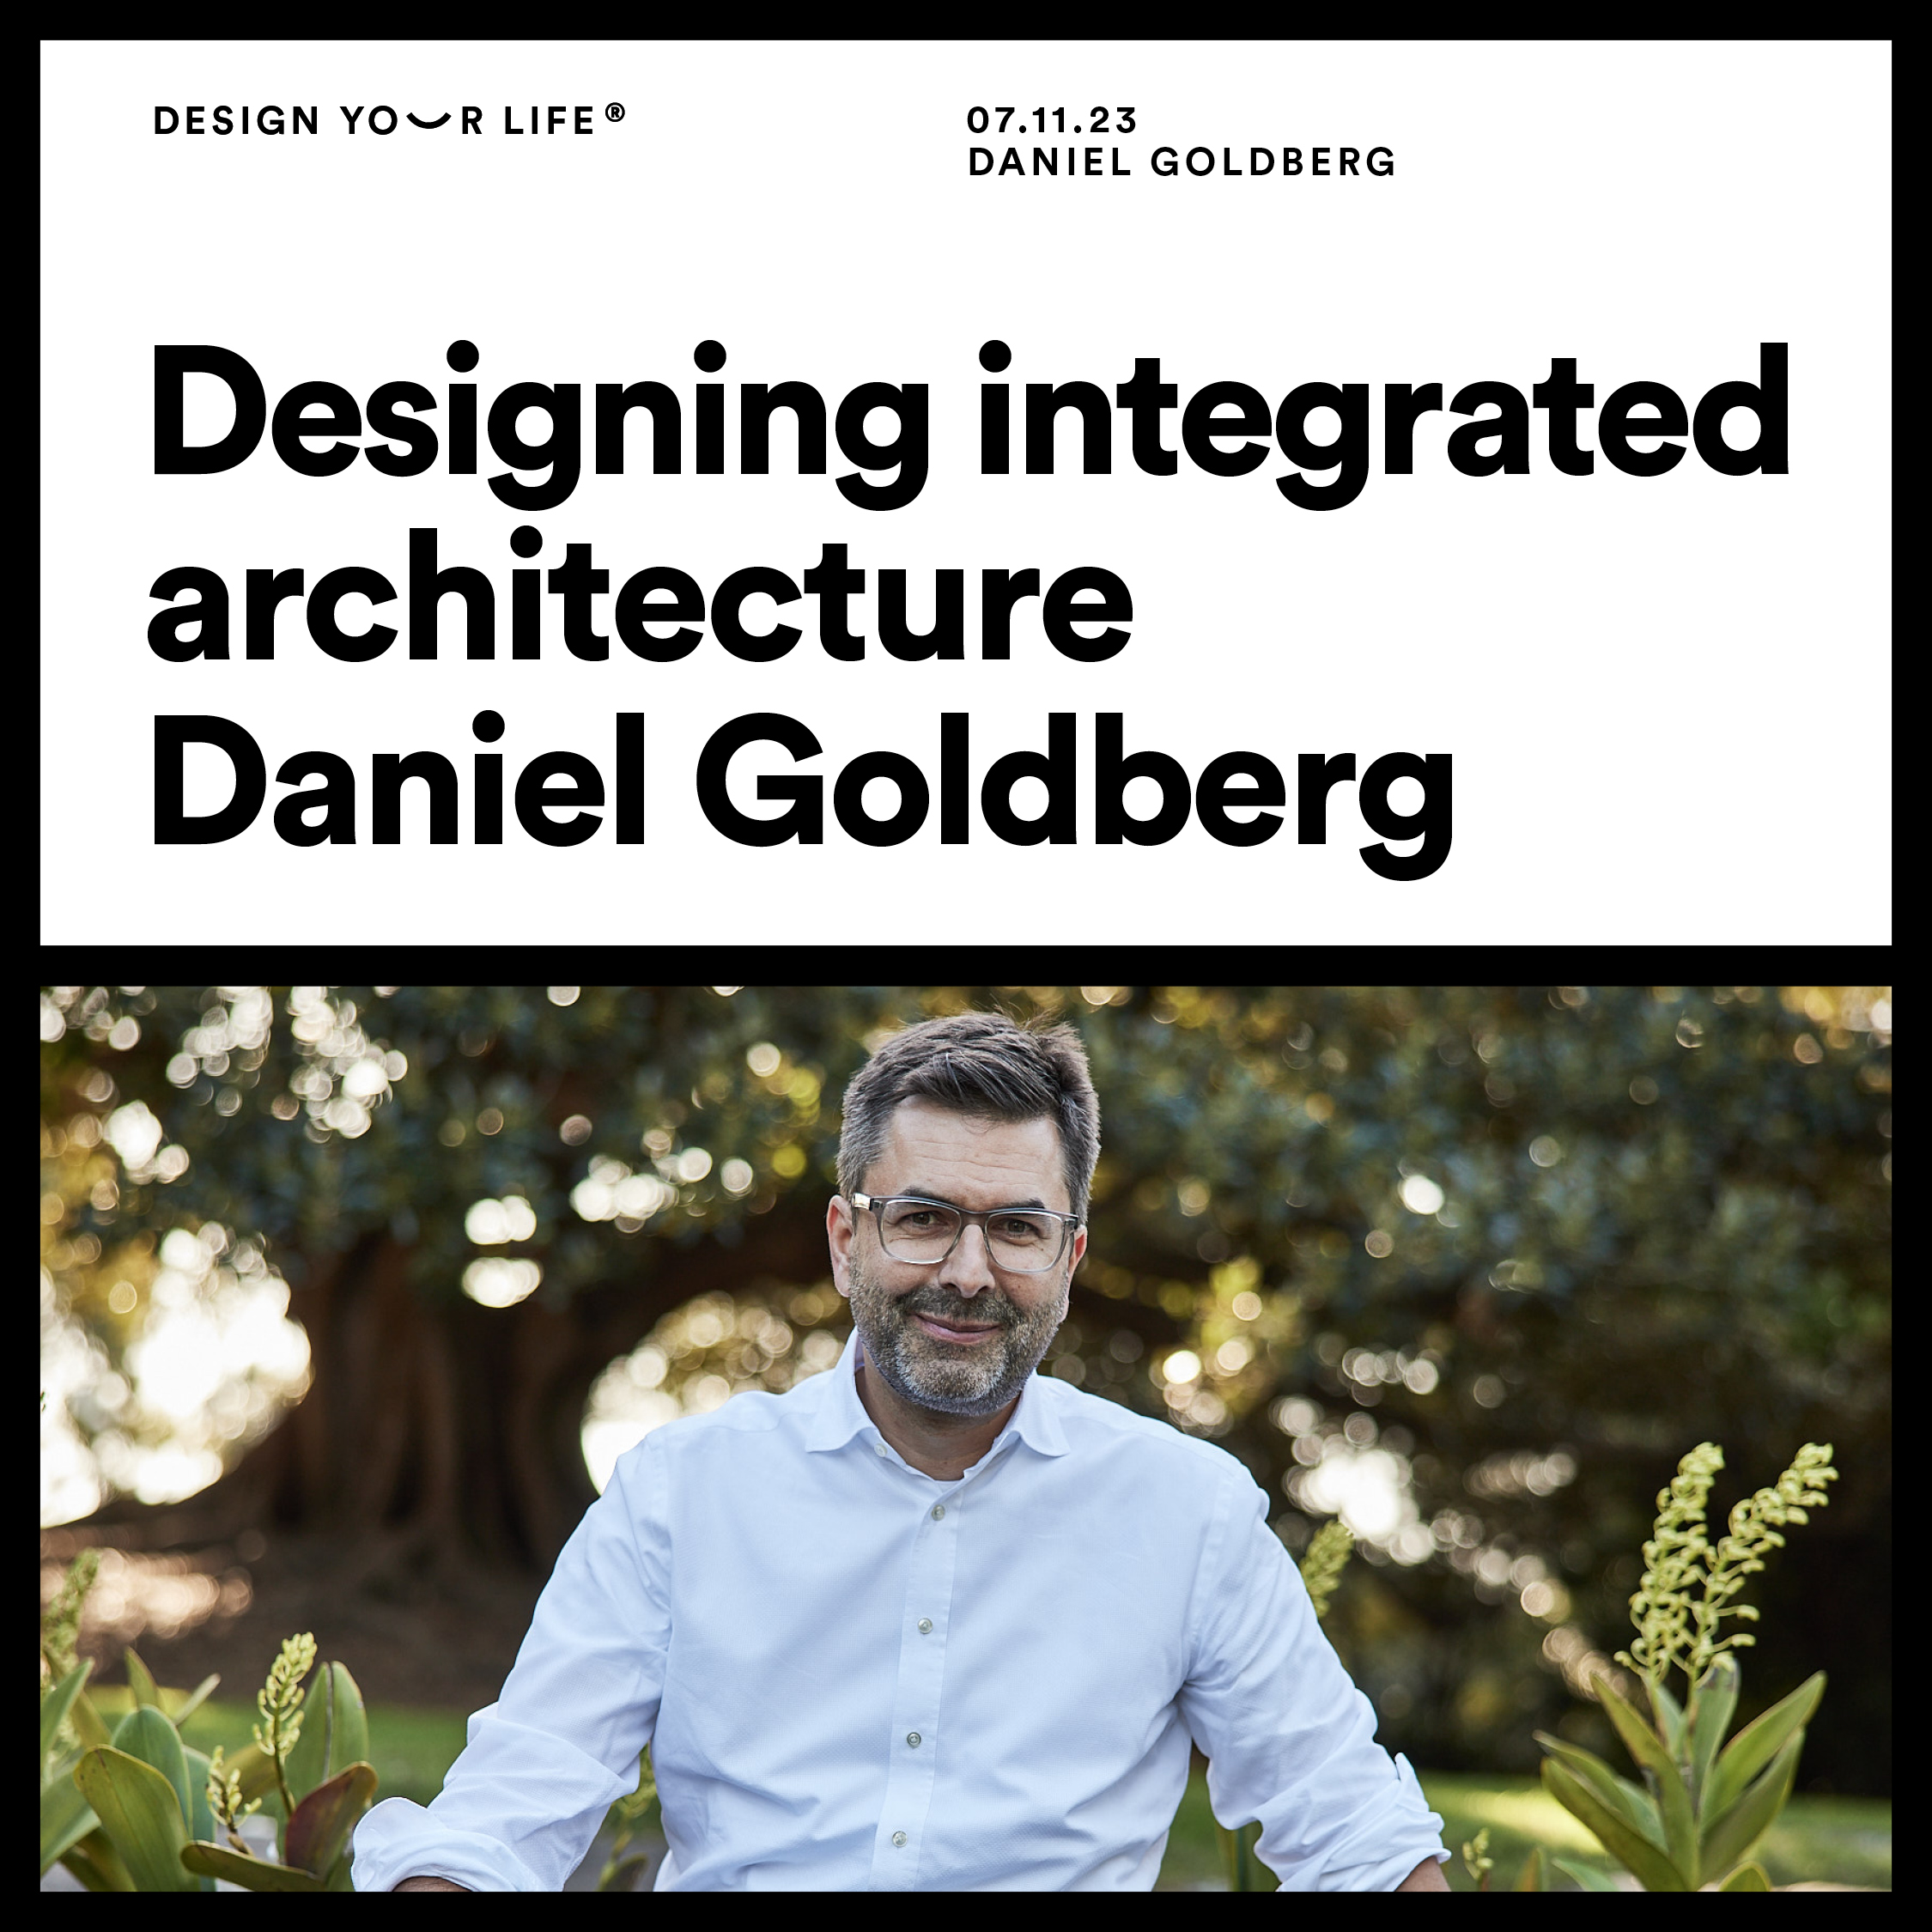 Designing integrated architecture with Daniel Goldberg